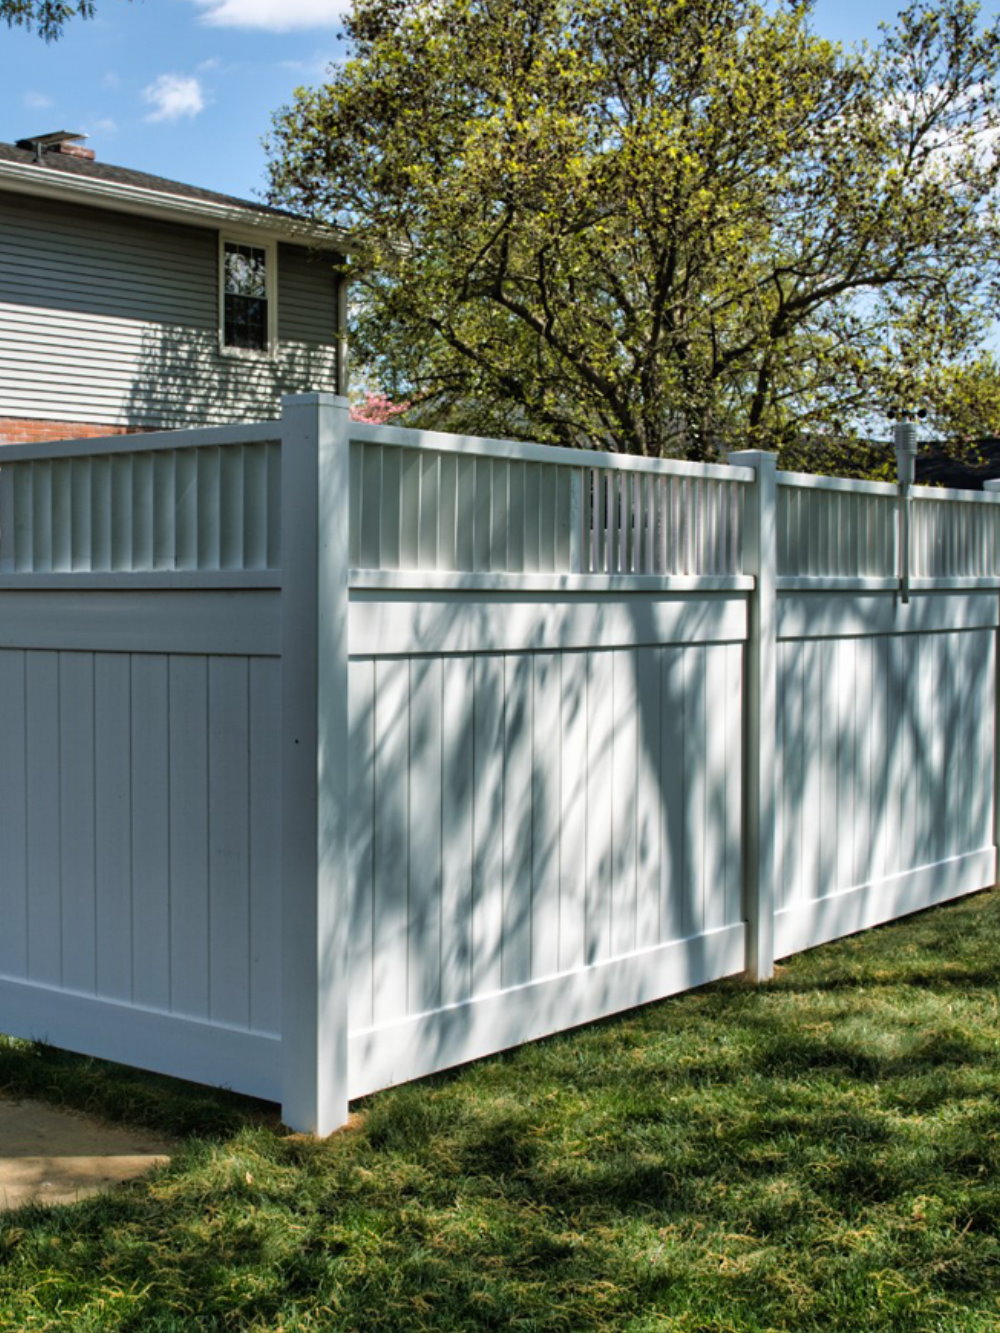 Types of fences we install in Newburgh IN